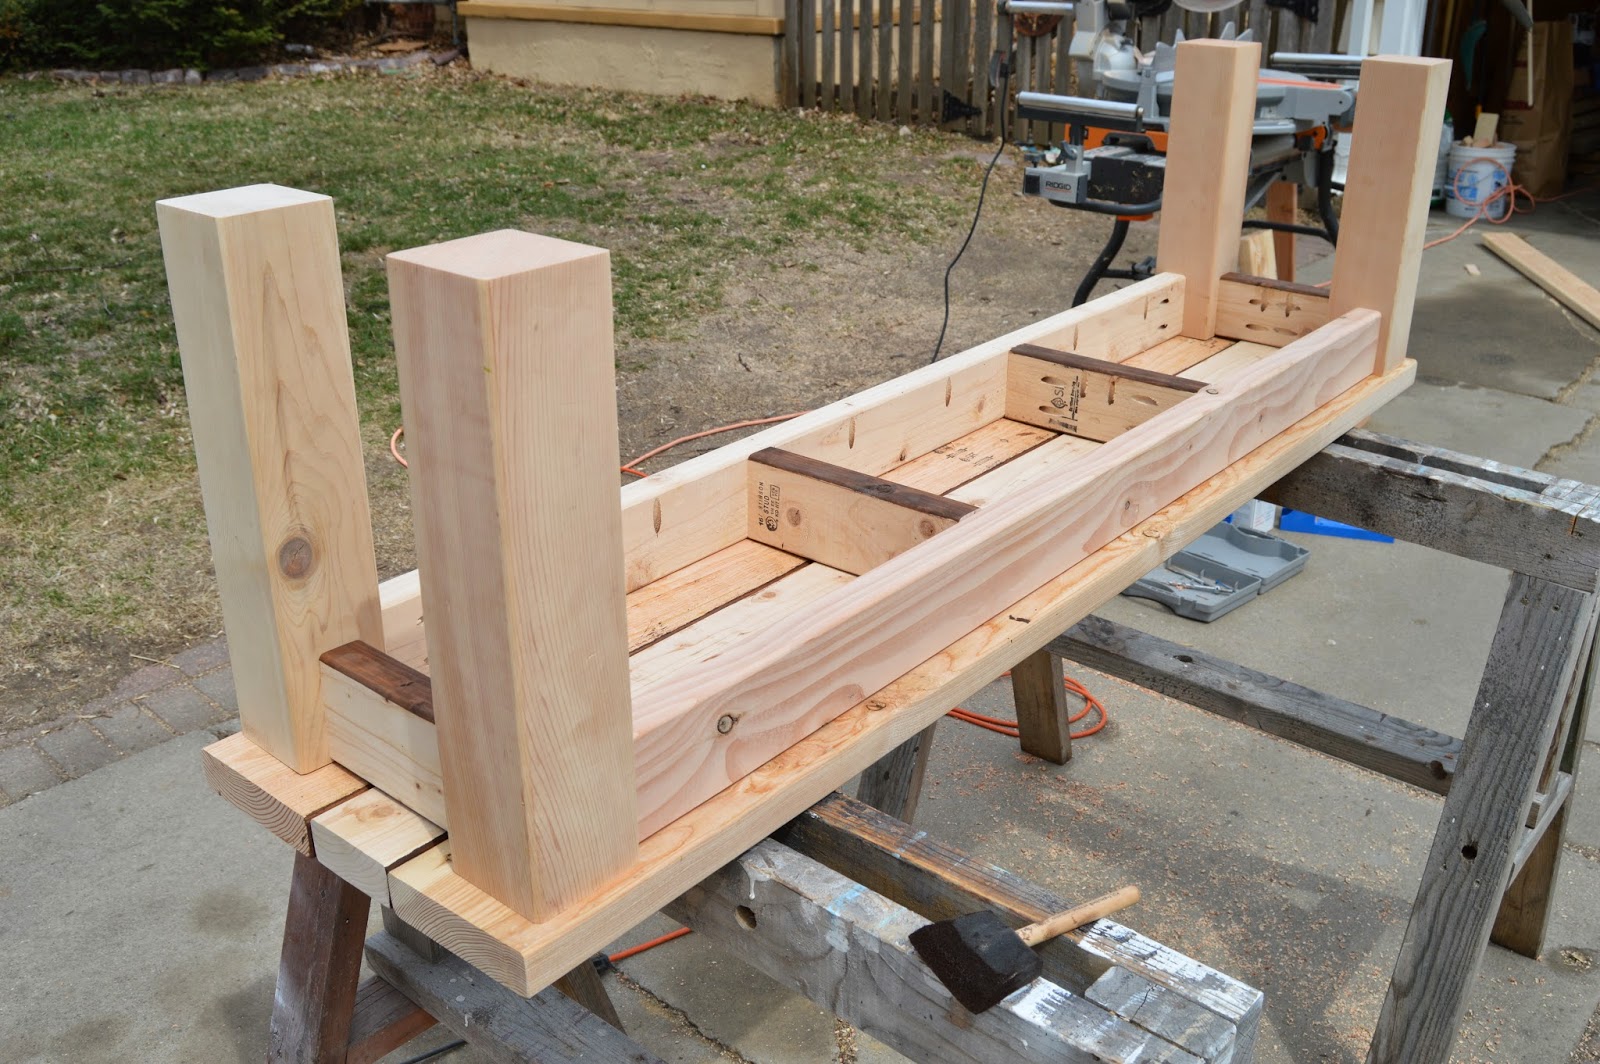  sets of legs are attached, set the bench down to verify it sits flat